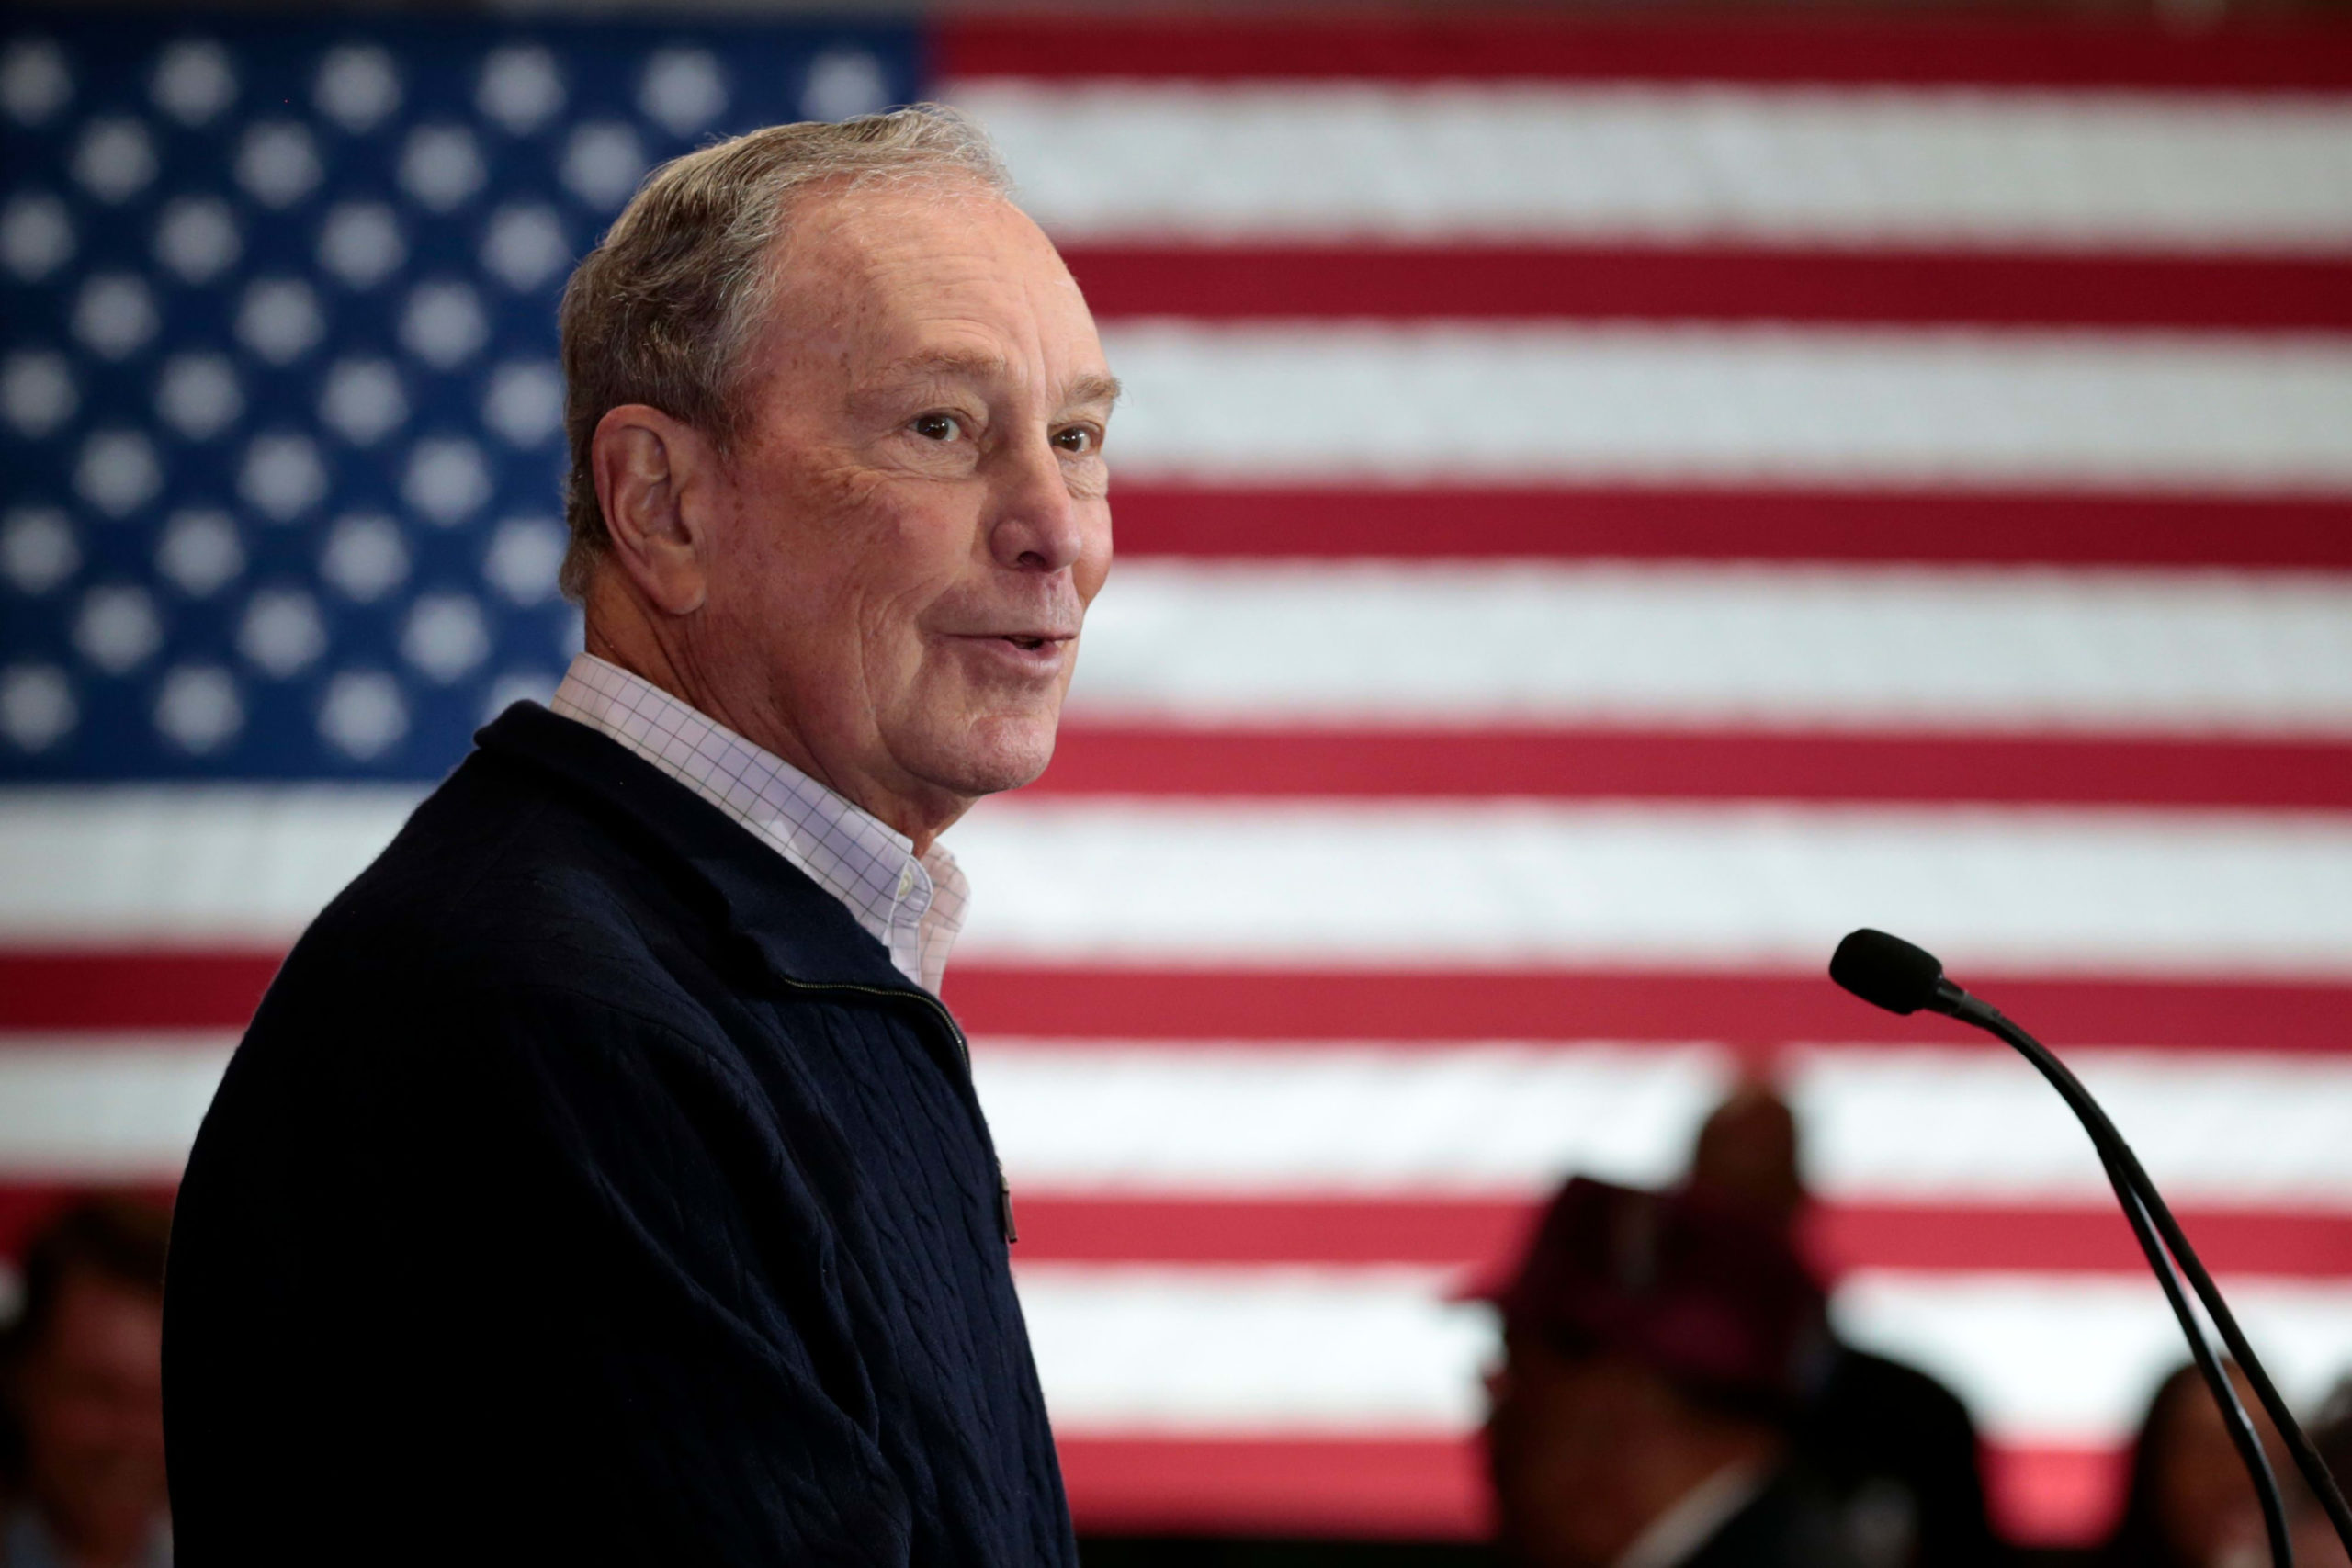 Billionaire Mike Bloomberg requires $5 trillion tax plan